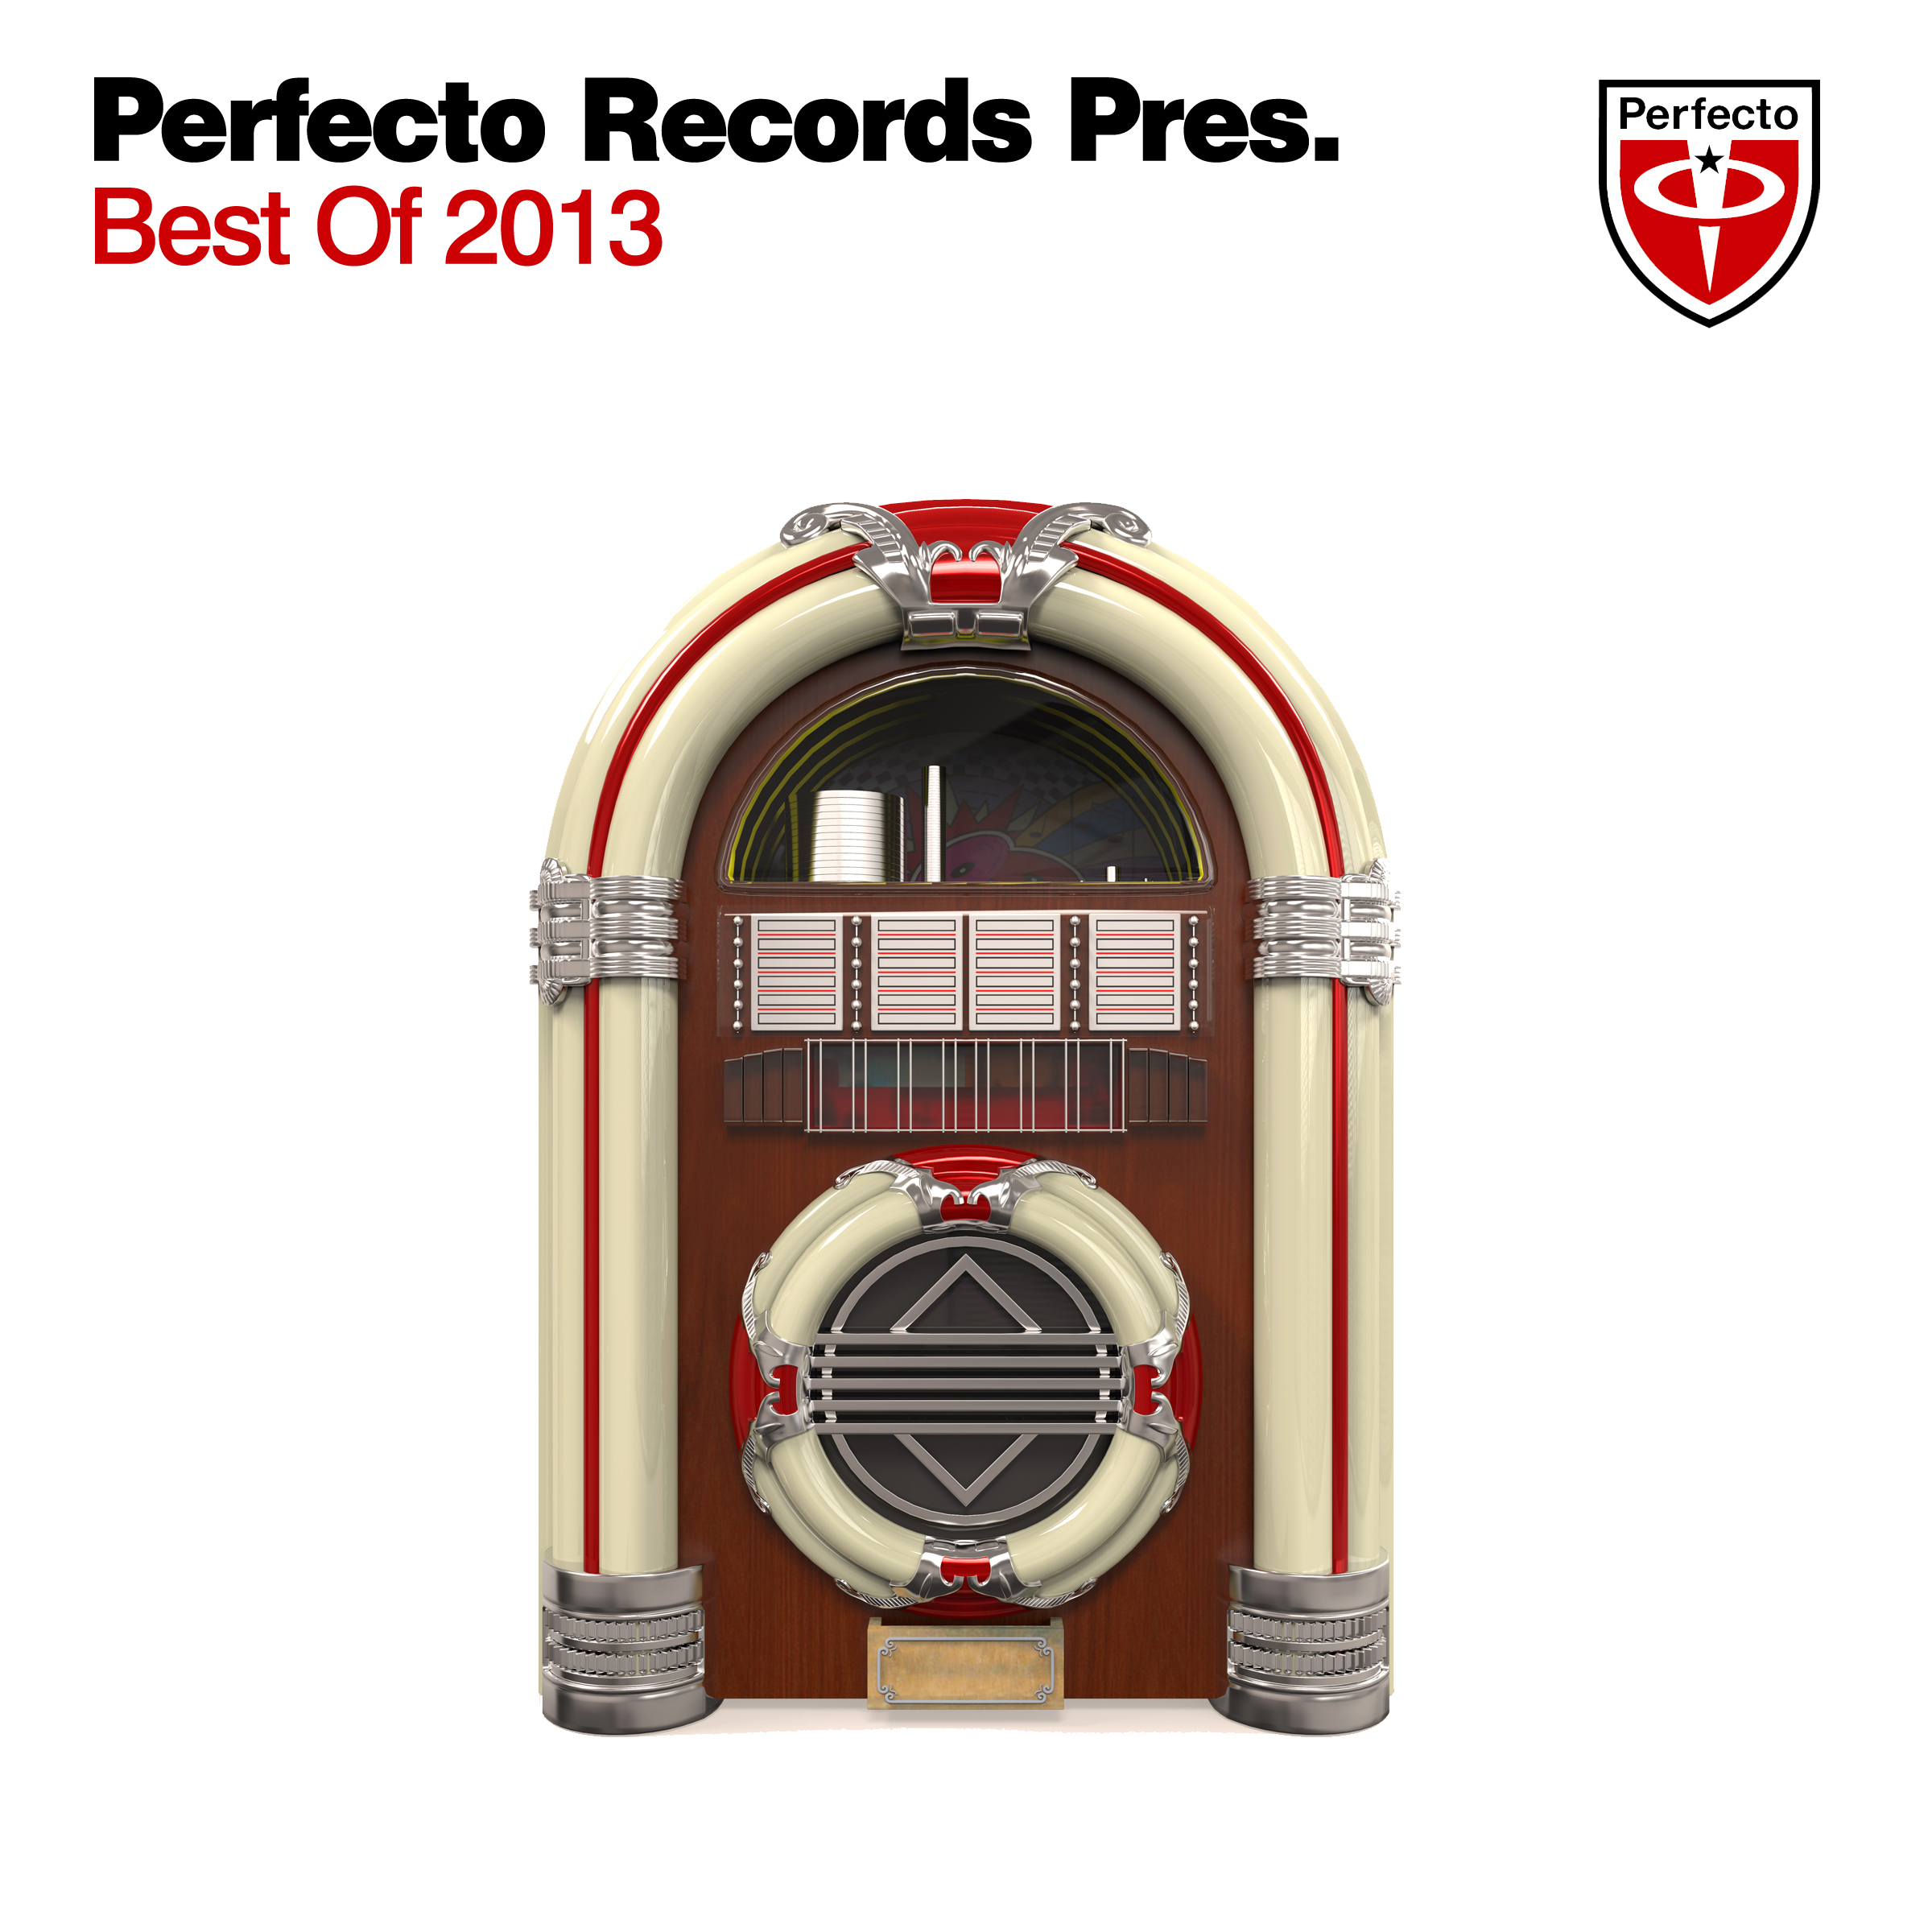 Perfecto Records - Best Of 2013